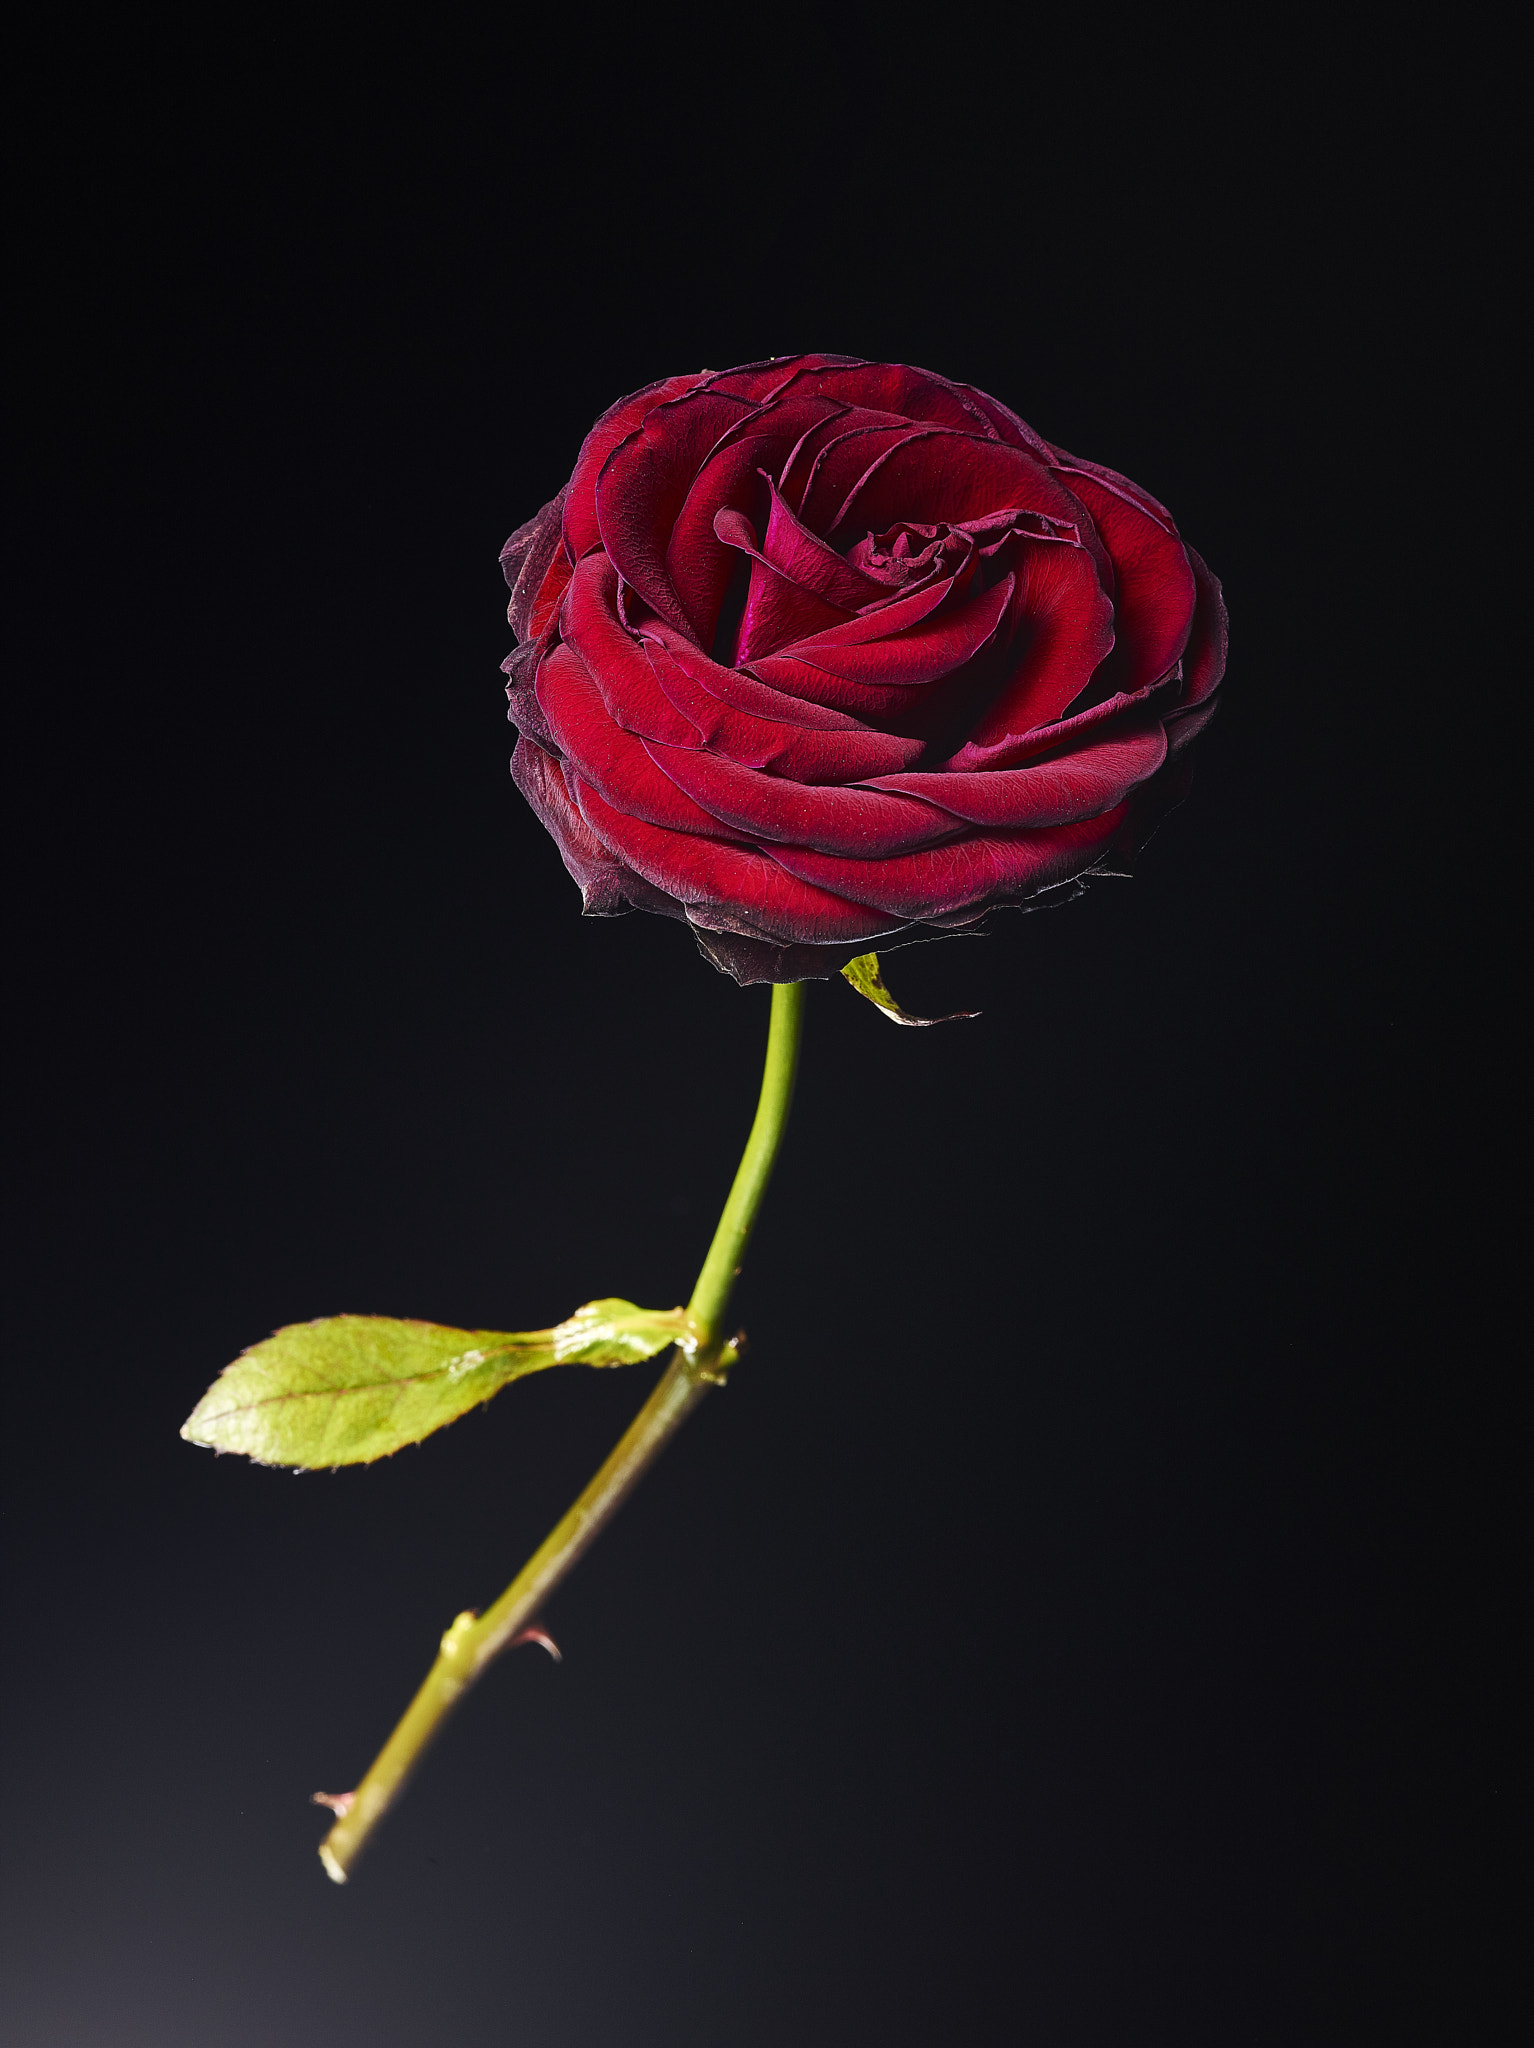 Schneider LS 120mm f/4.0 sample photo. Red rose photography